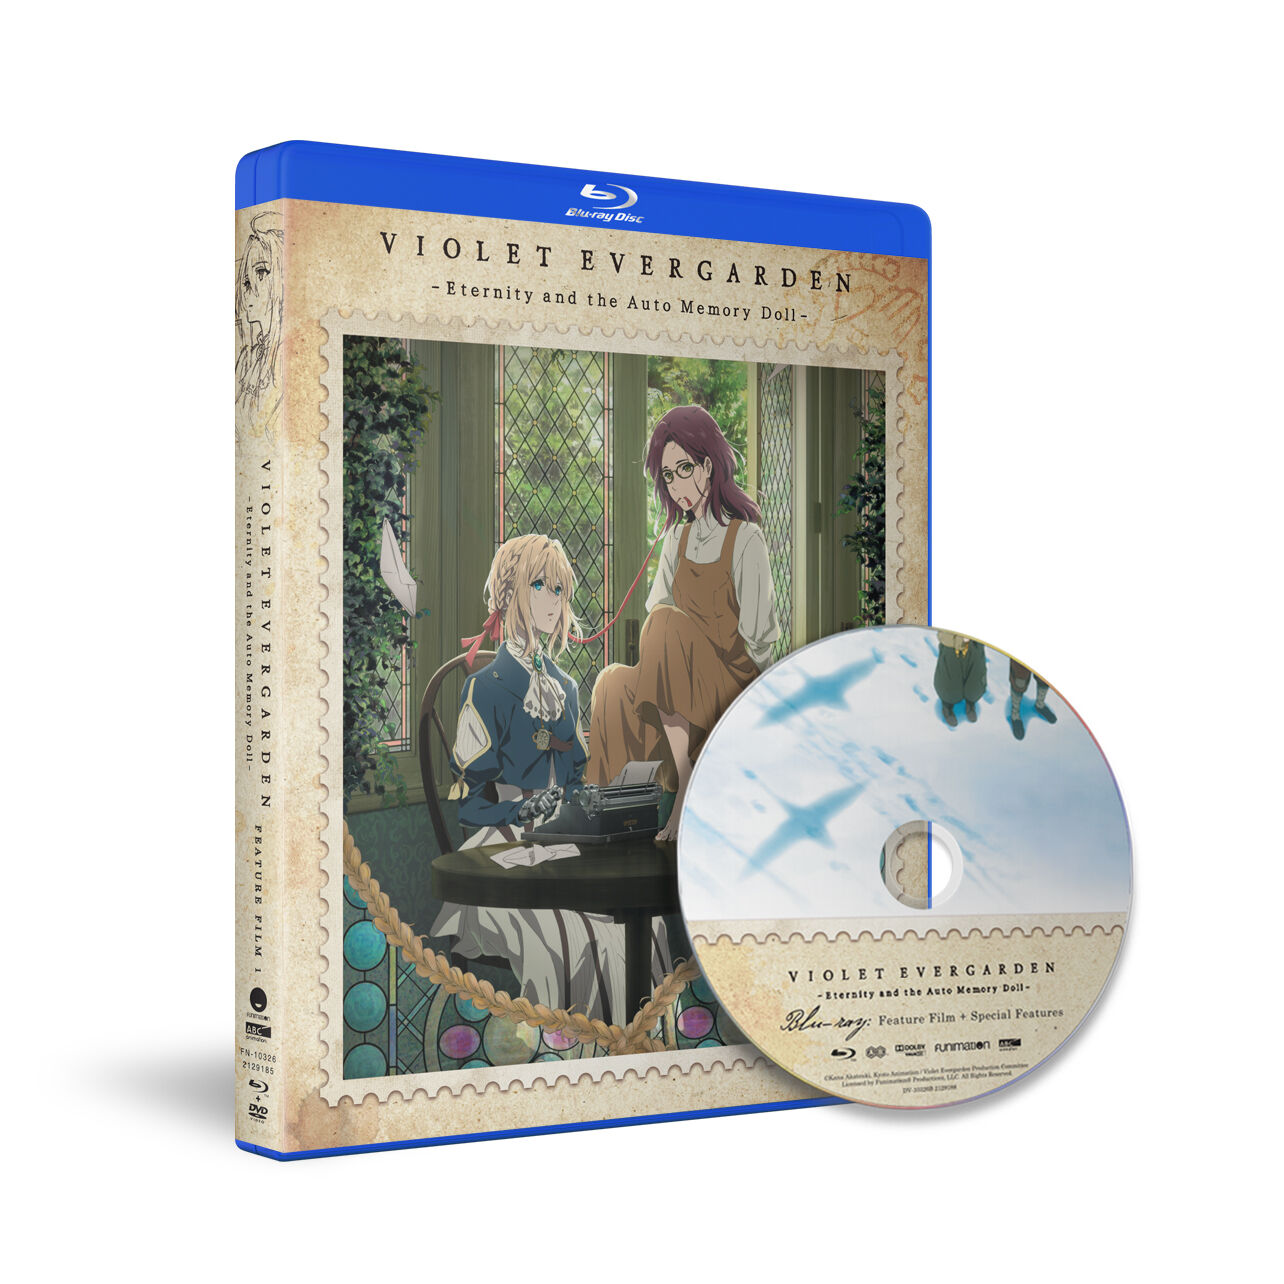 download violet evergarden violet evergarden eternity and the auto memory doll